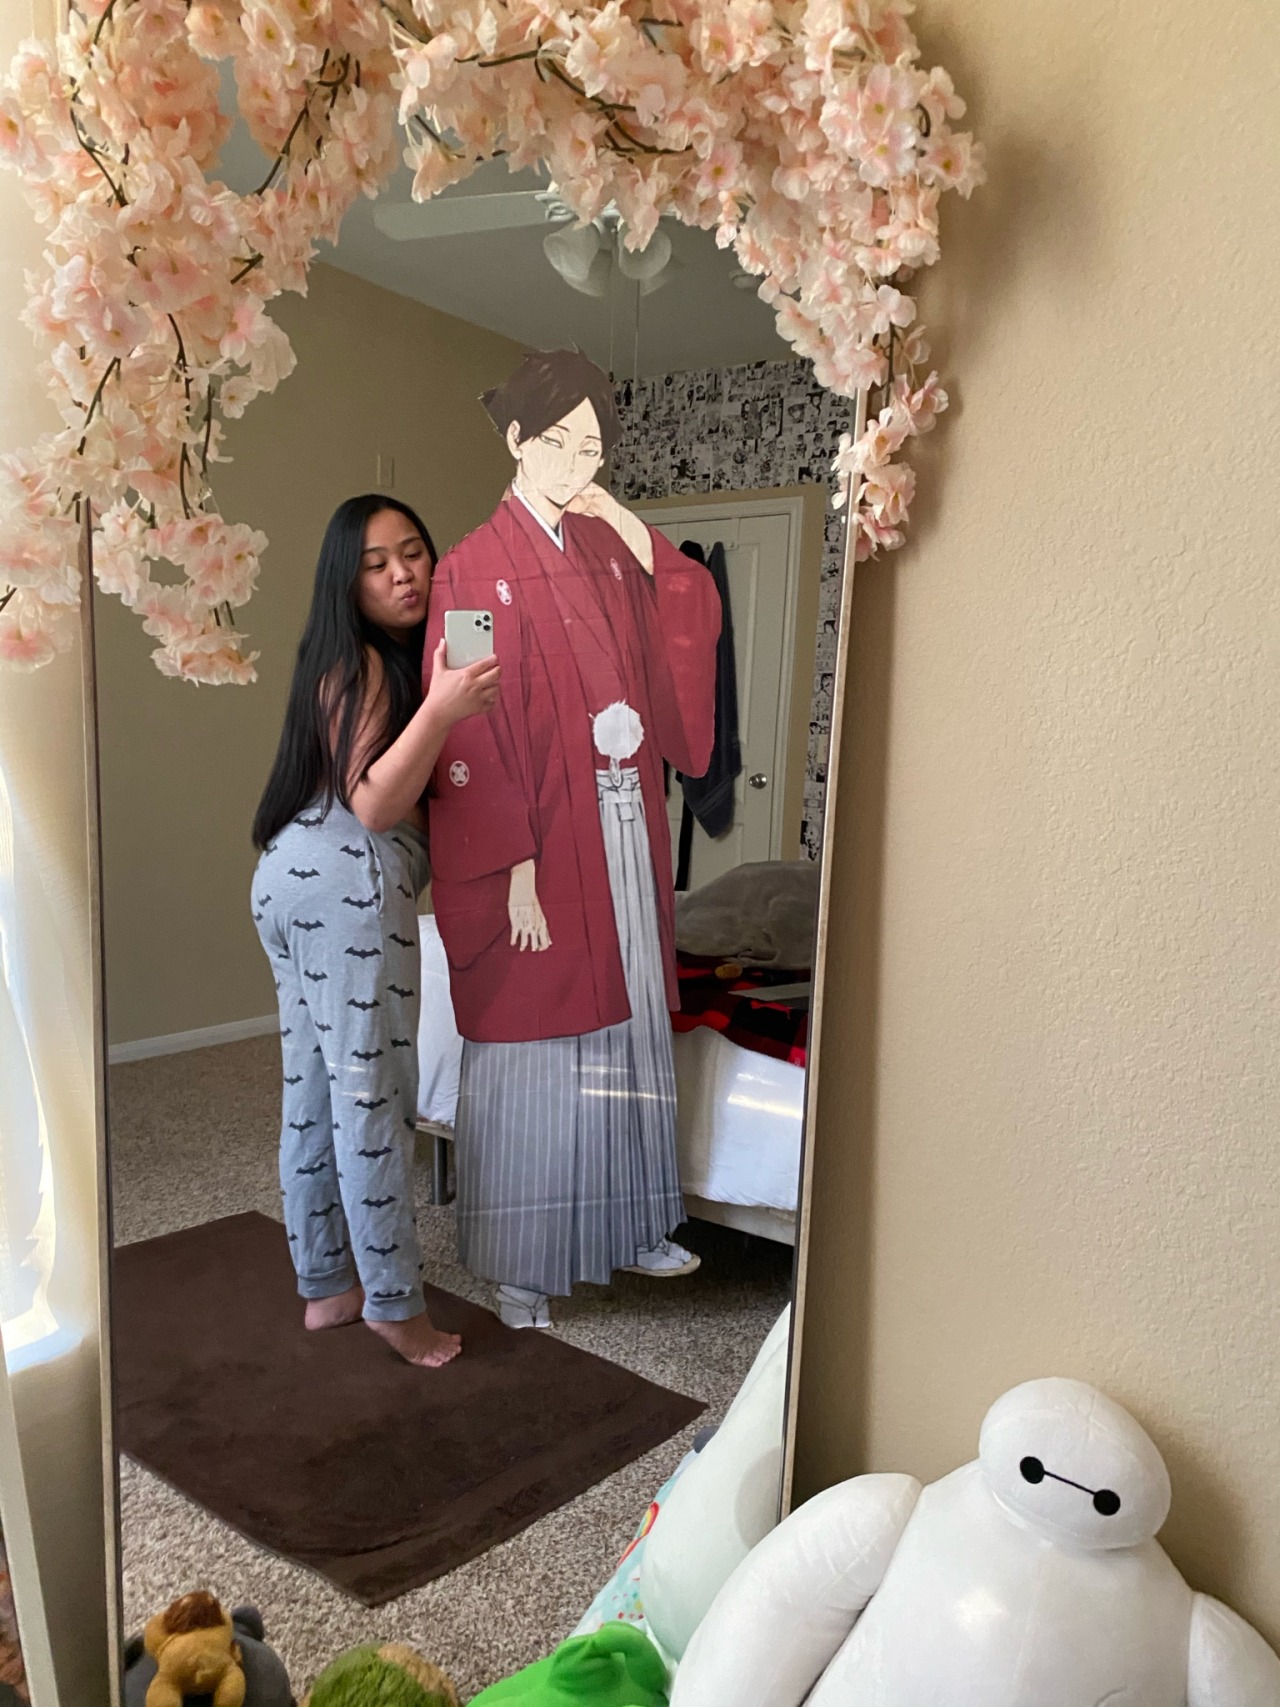 Cardboard Cutout Tumblr Posts Tumbral Com These anime cardboard cutouts are freestanding with custom designs. cardboard cutout tumblr posts tumbral com